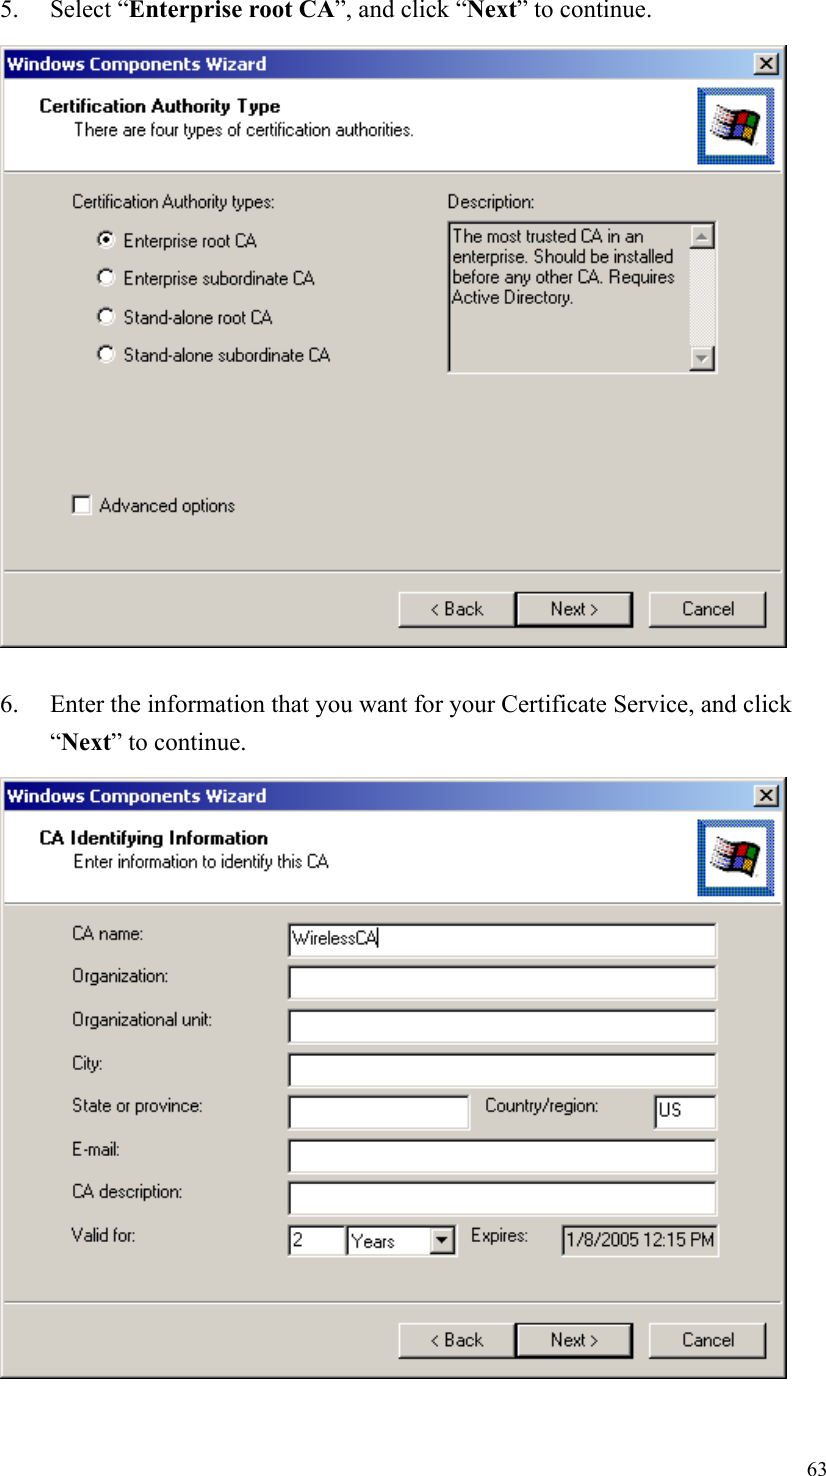 635. Select “Enterprise root CA”, and click “Next” to continue.6. Enter the information that you want for your Certificate Service, and click“Next” to continue.